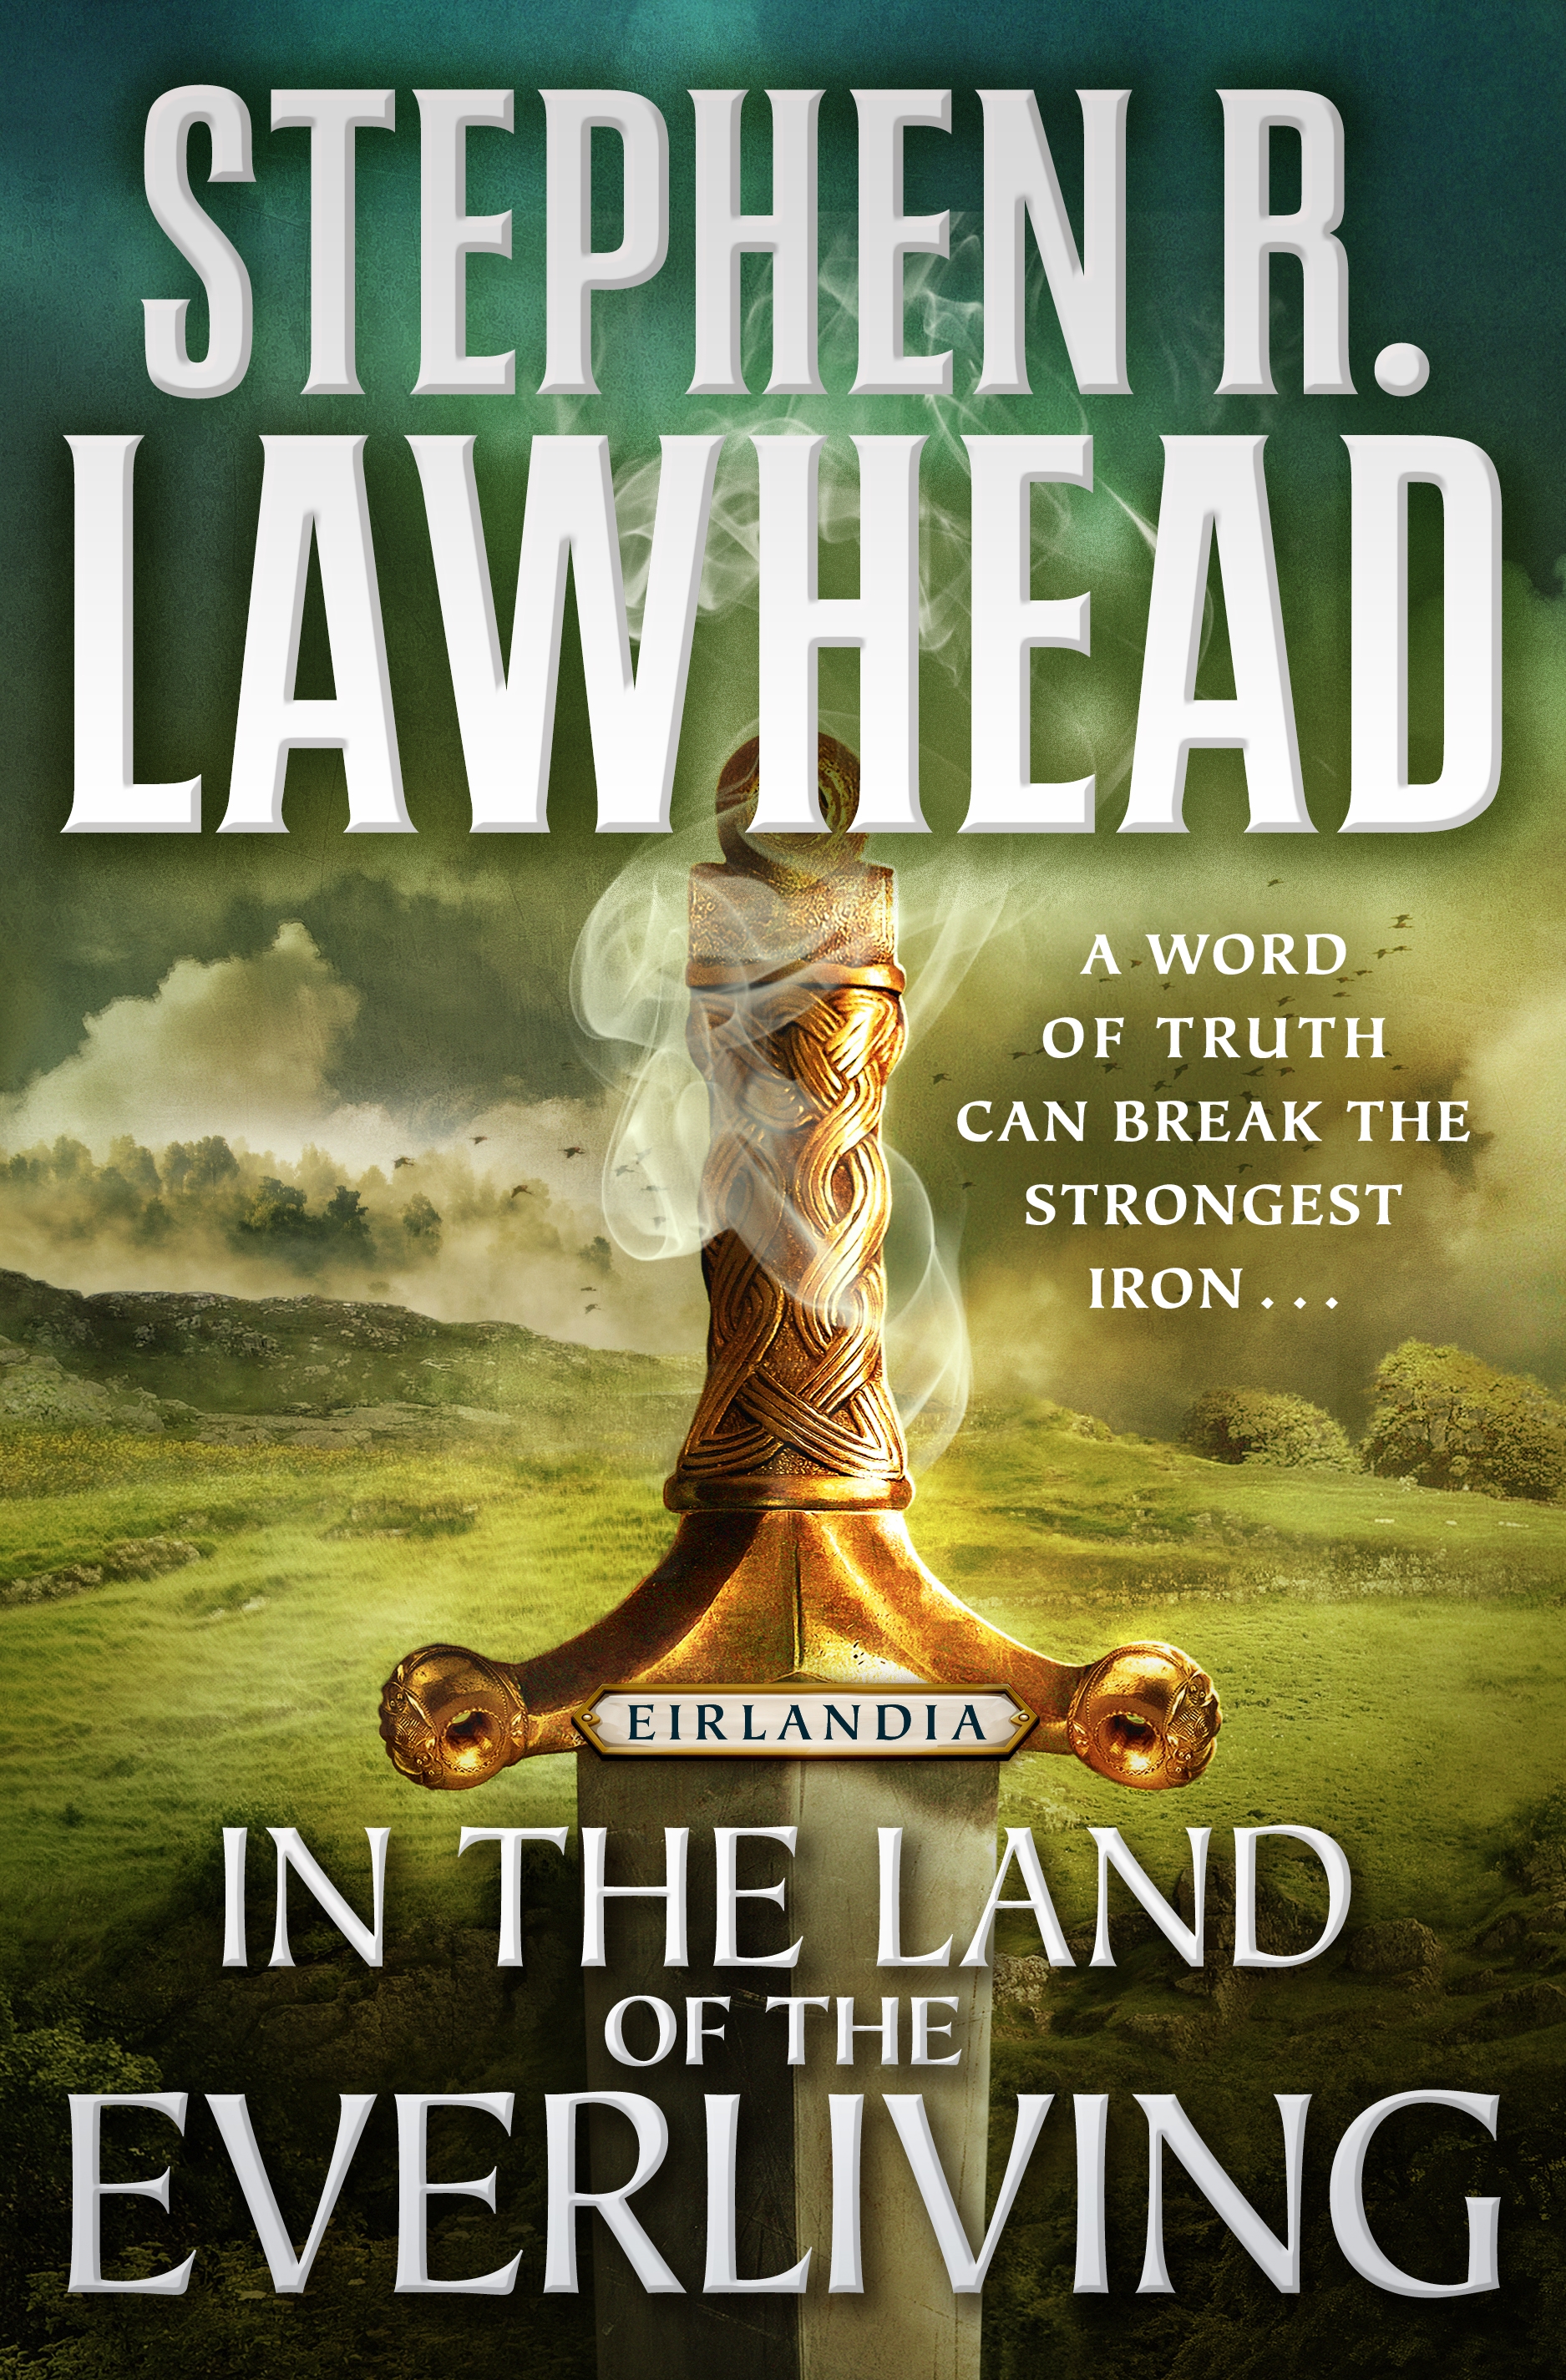 In the Land of the Everliving : Eirlandia, Book Two by Stephen R. Lawhead